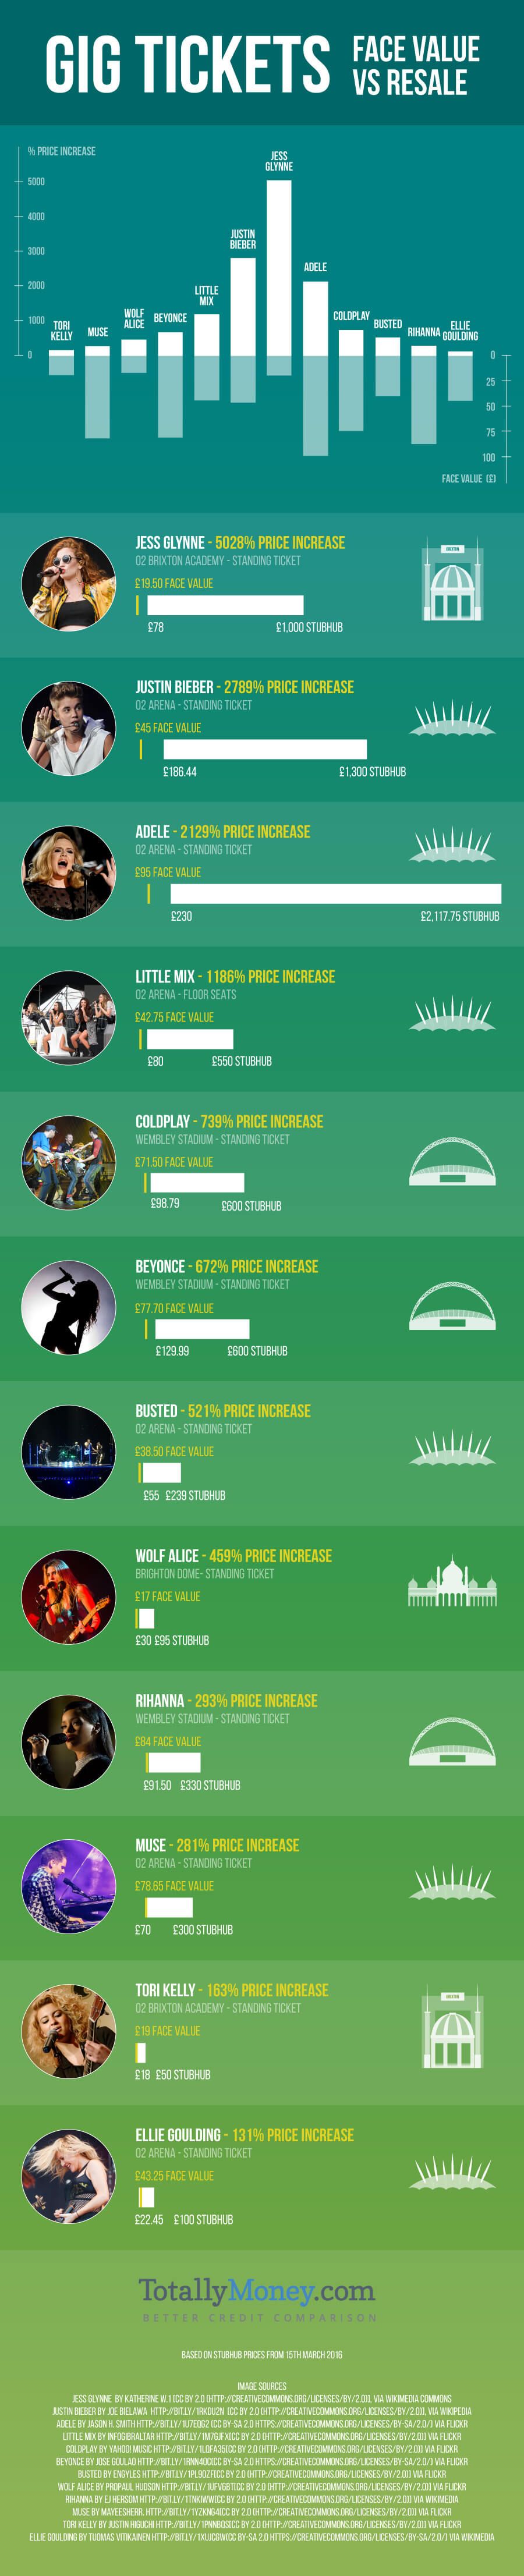 Gig Tickets: Face Value vs Resale infographic